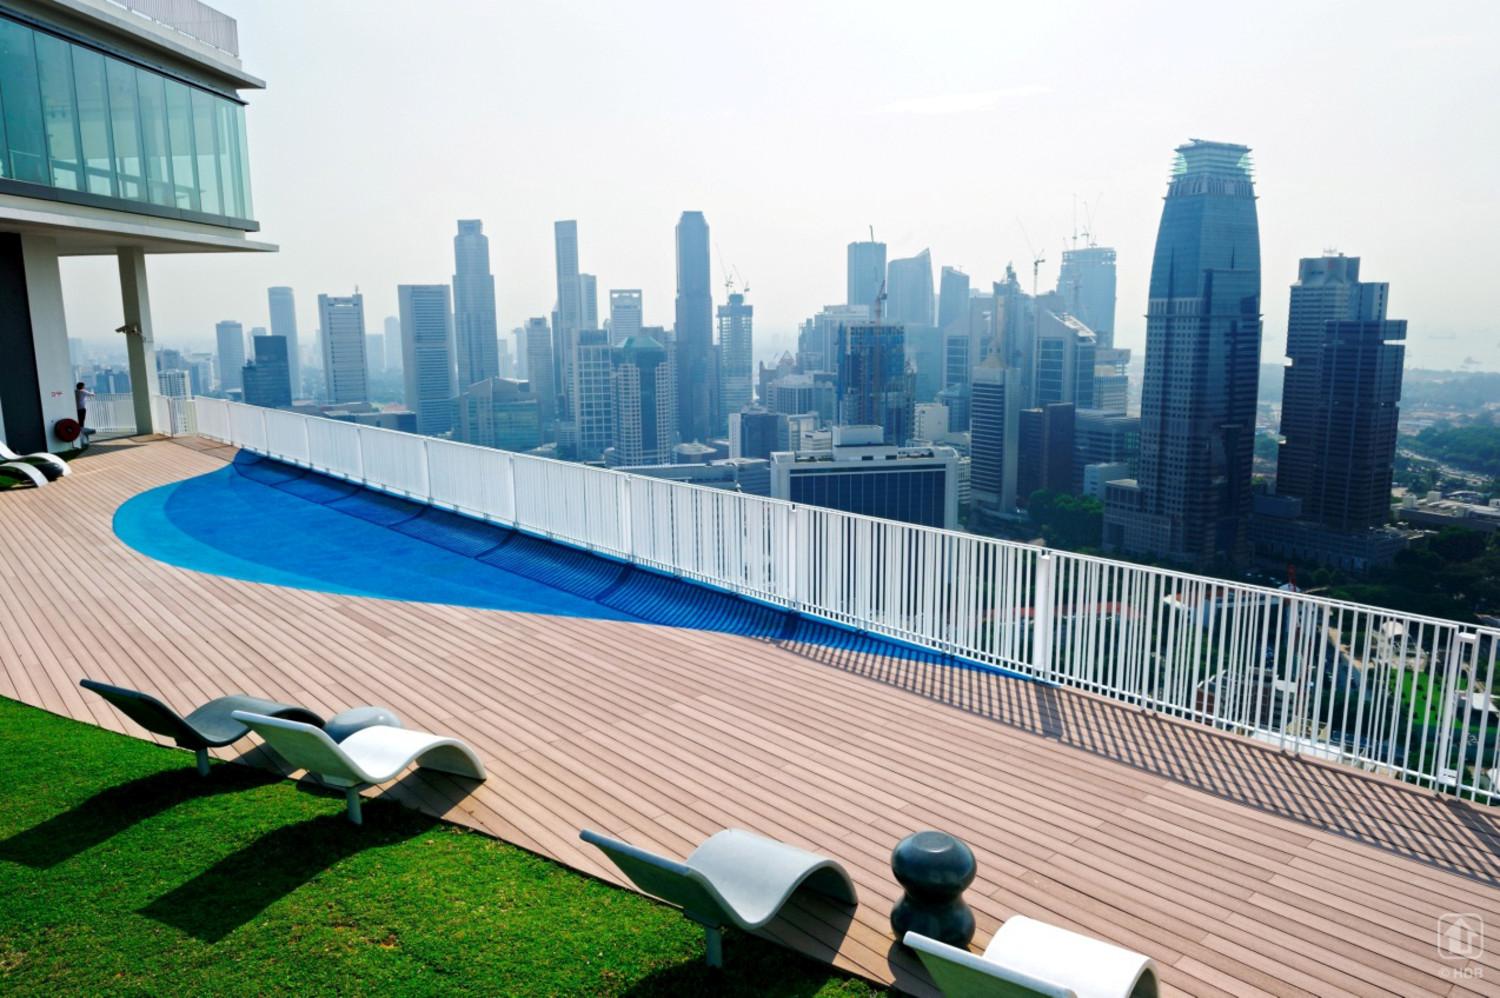 The sky bridge at the 50th storey, overlooking the central business
district.